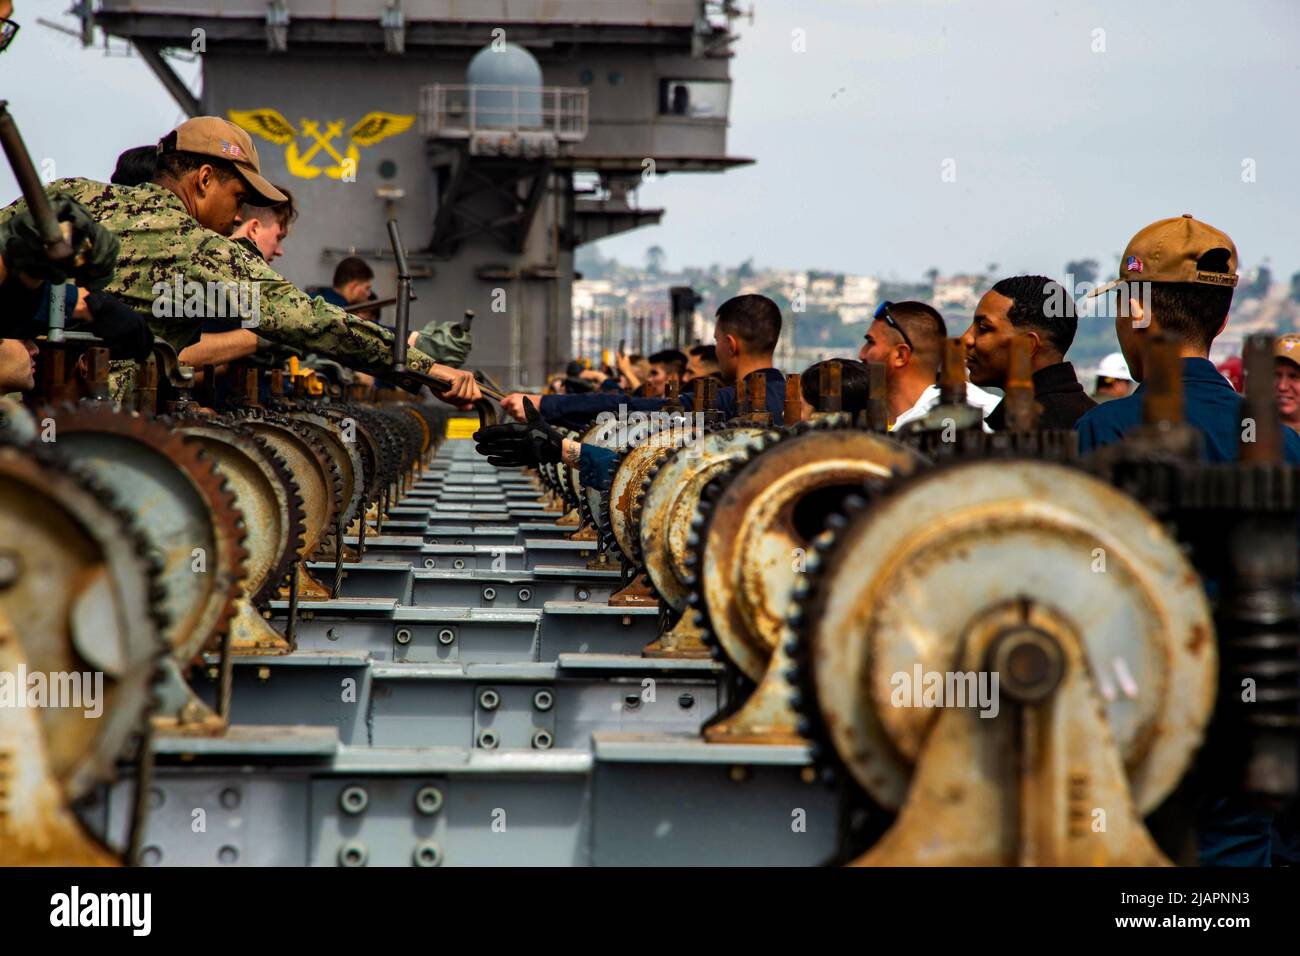 San Diego, California, USA. 19th May, 2022. Sailors exchange tools that turn gears to lift and remove an aircraft catapult on the flight deck of Nimitz-class aircraft carrier USS Carl Vinson (CVN 70). Carl Vinson is currently pierside in its homeport of San Diego. Credit: U.S. Navy/ZUMA Press Wire Service/ZUMAPRESS.com/Alamy Live News Stock Photo